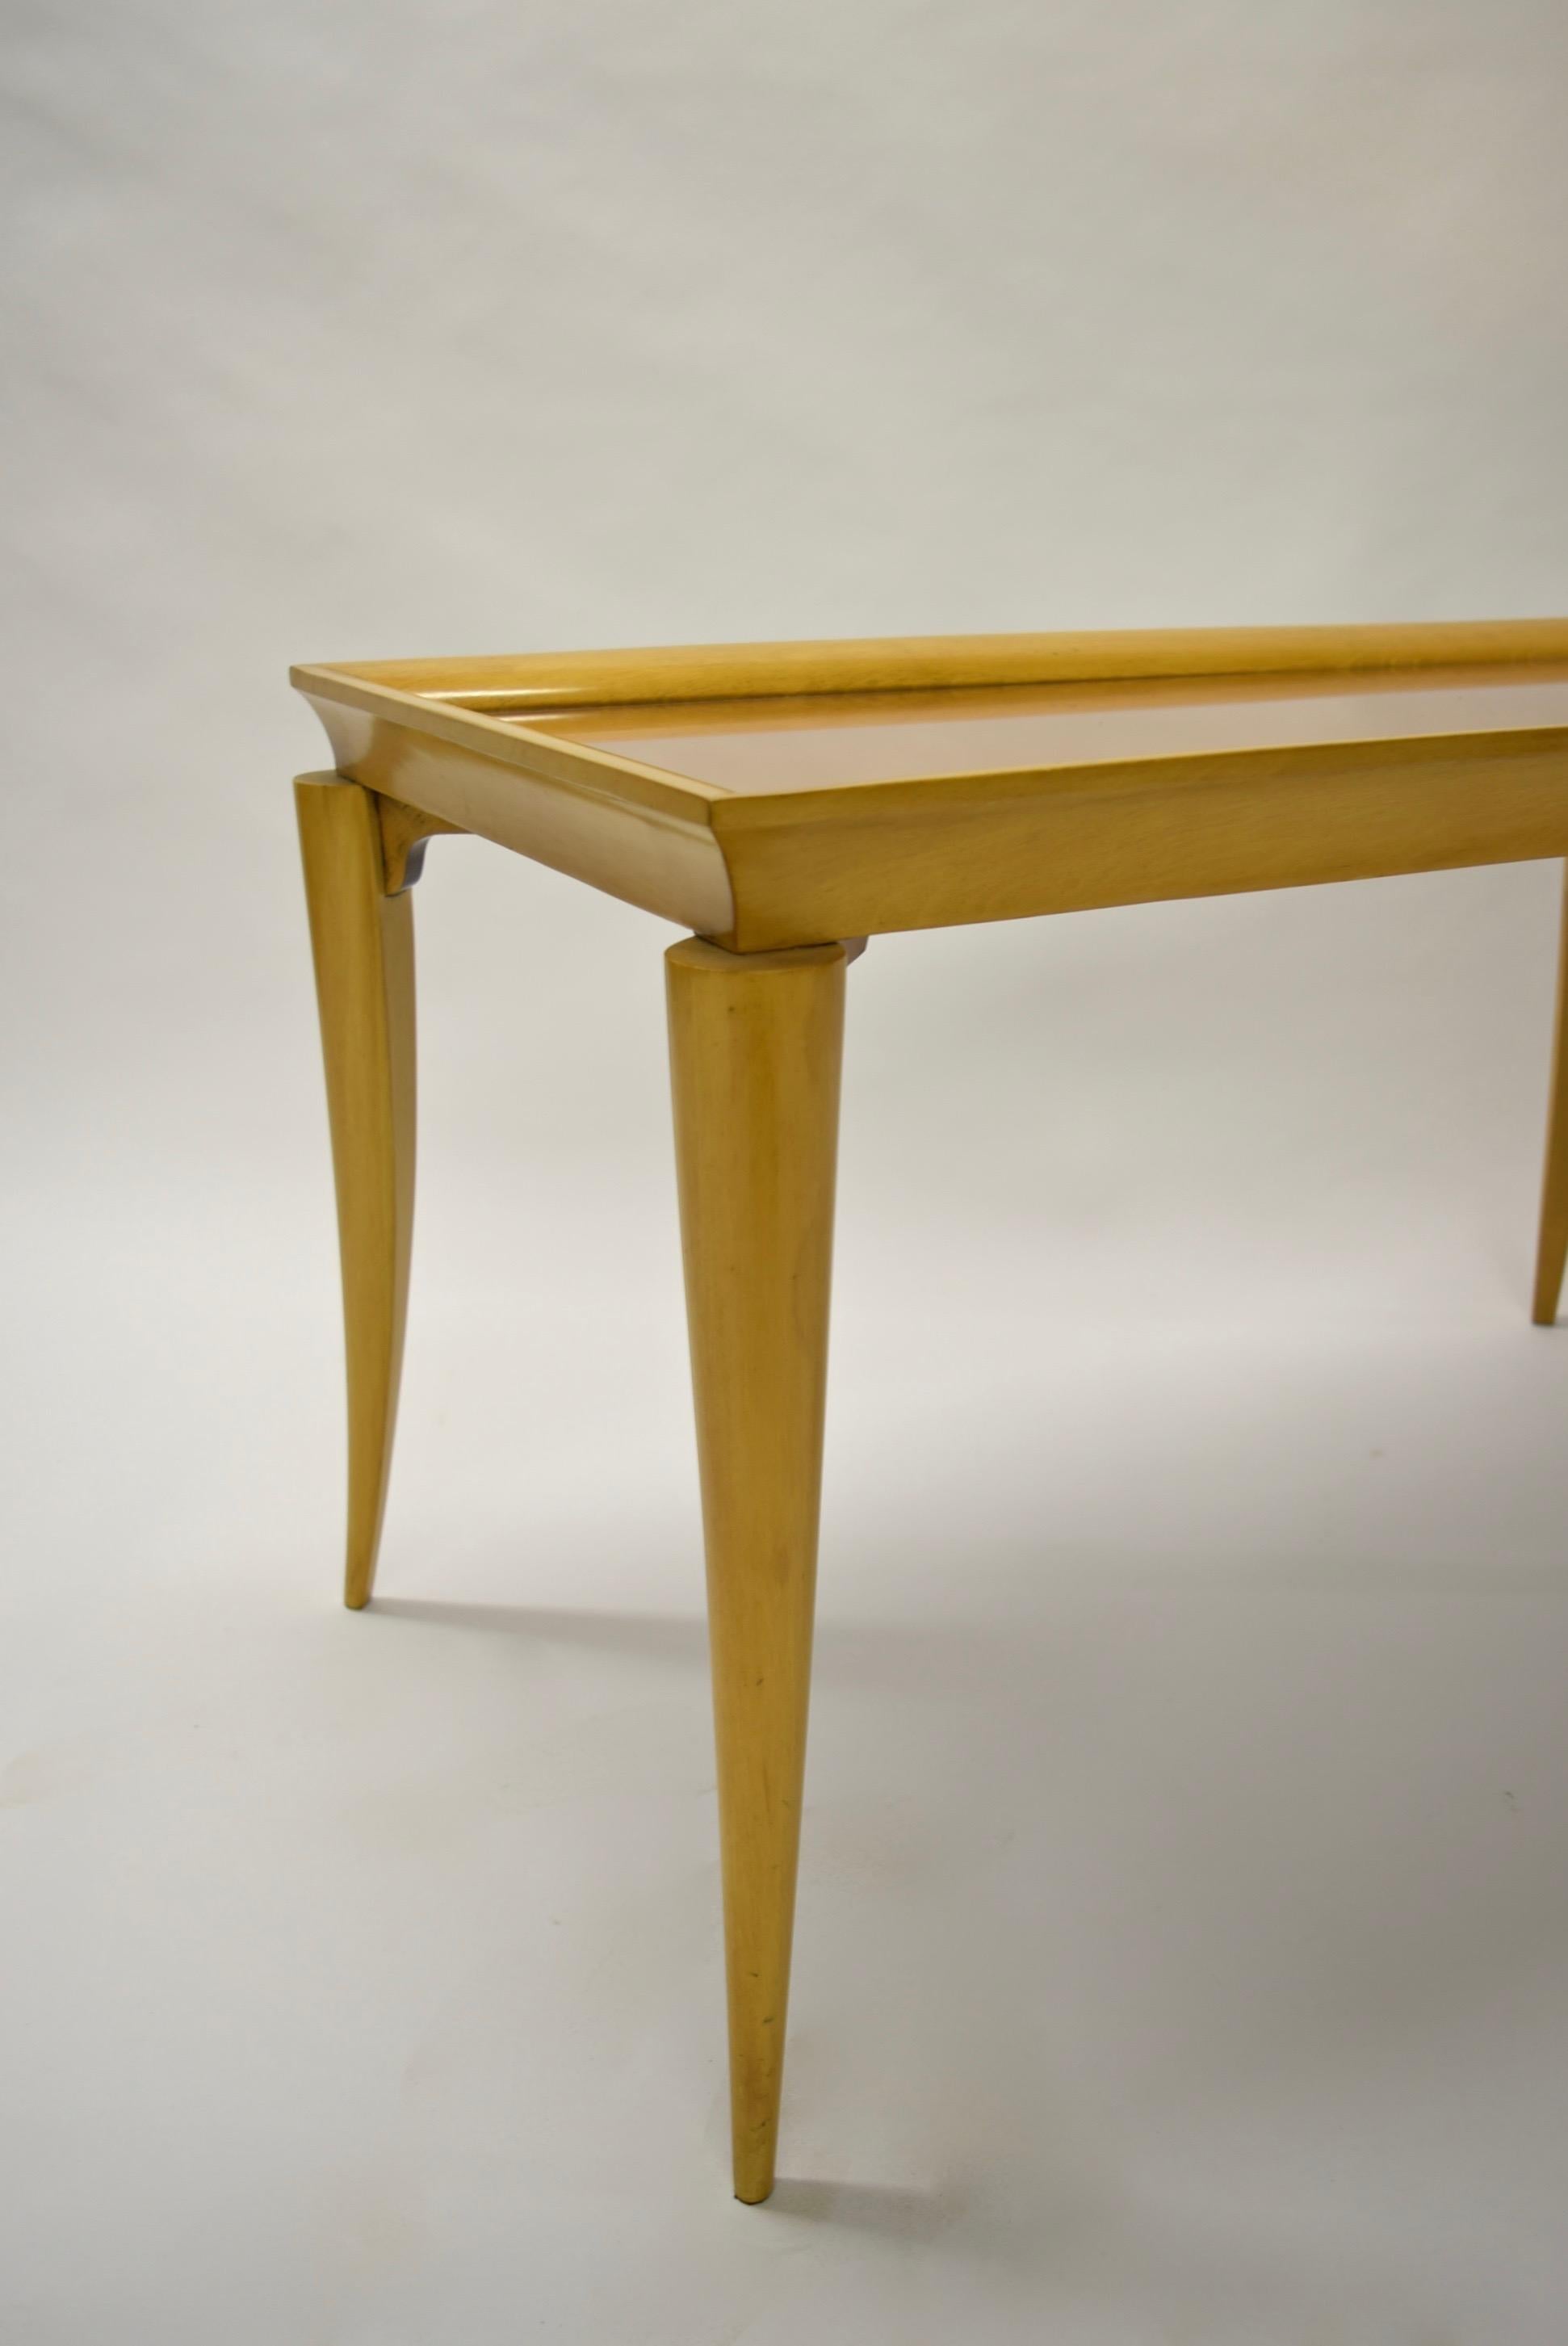 Mid-20th Century Coffee or Cocktail Table with Peach Colored Mirrored Glass, France Circa 1935 For Sale